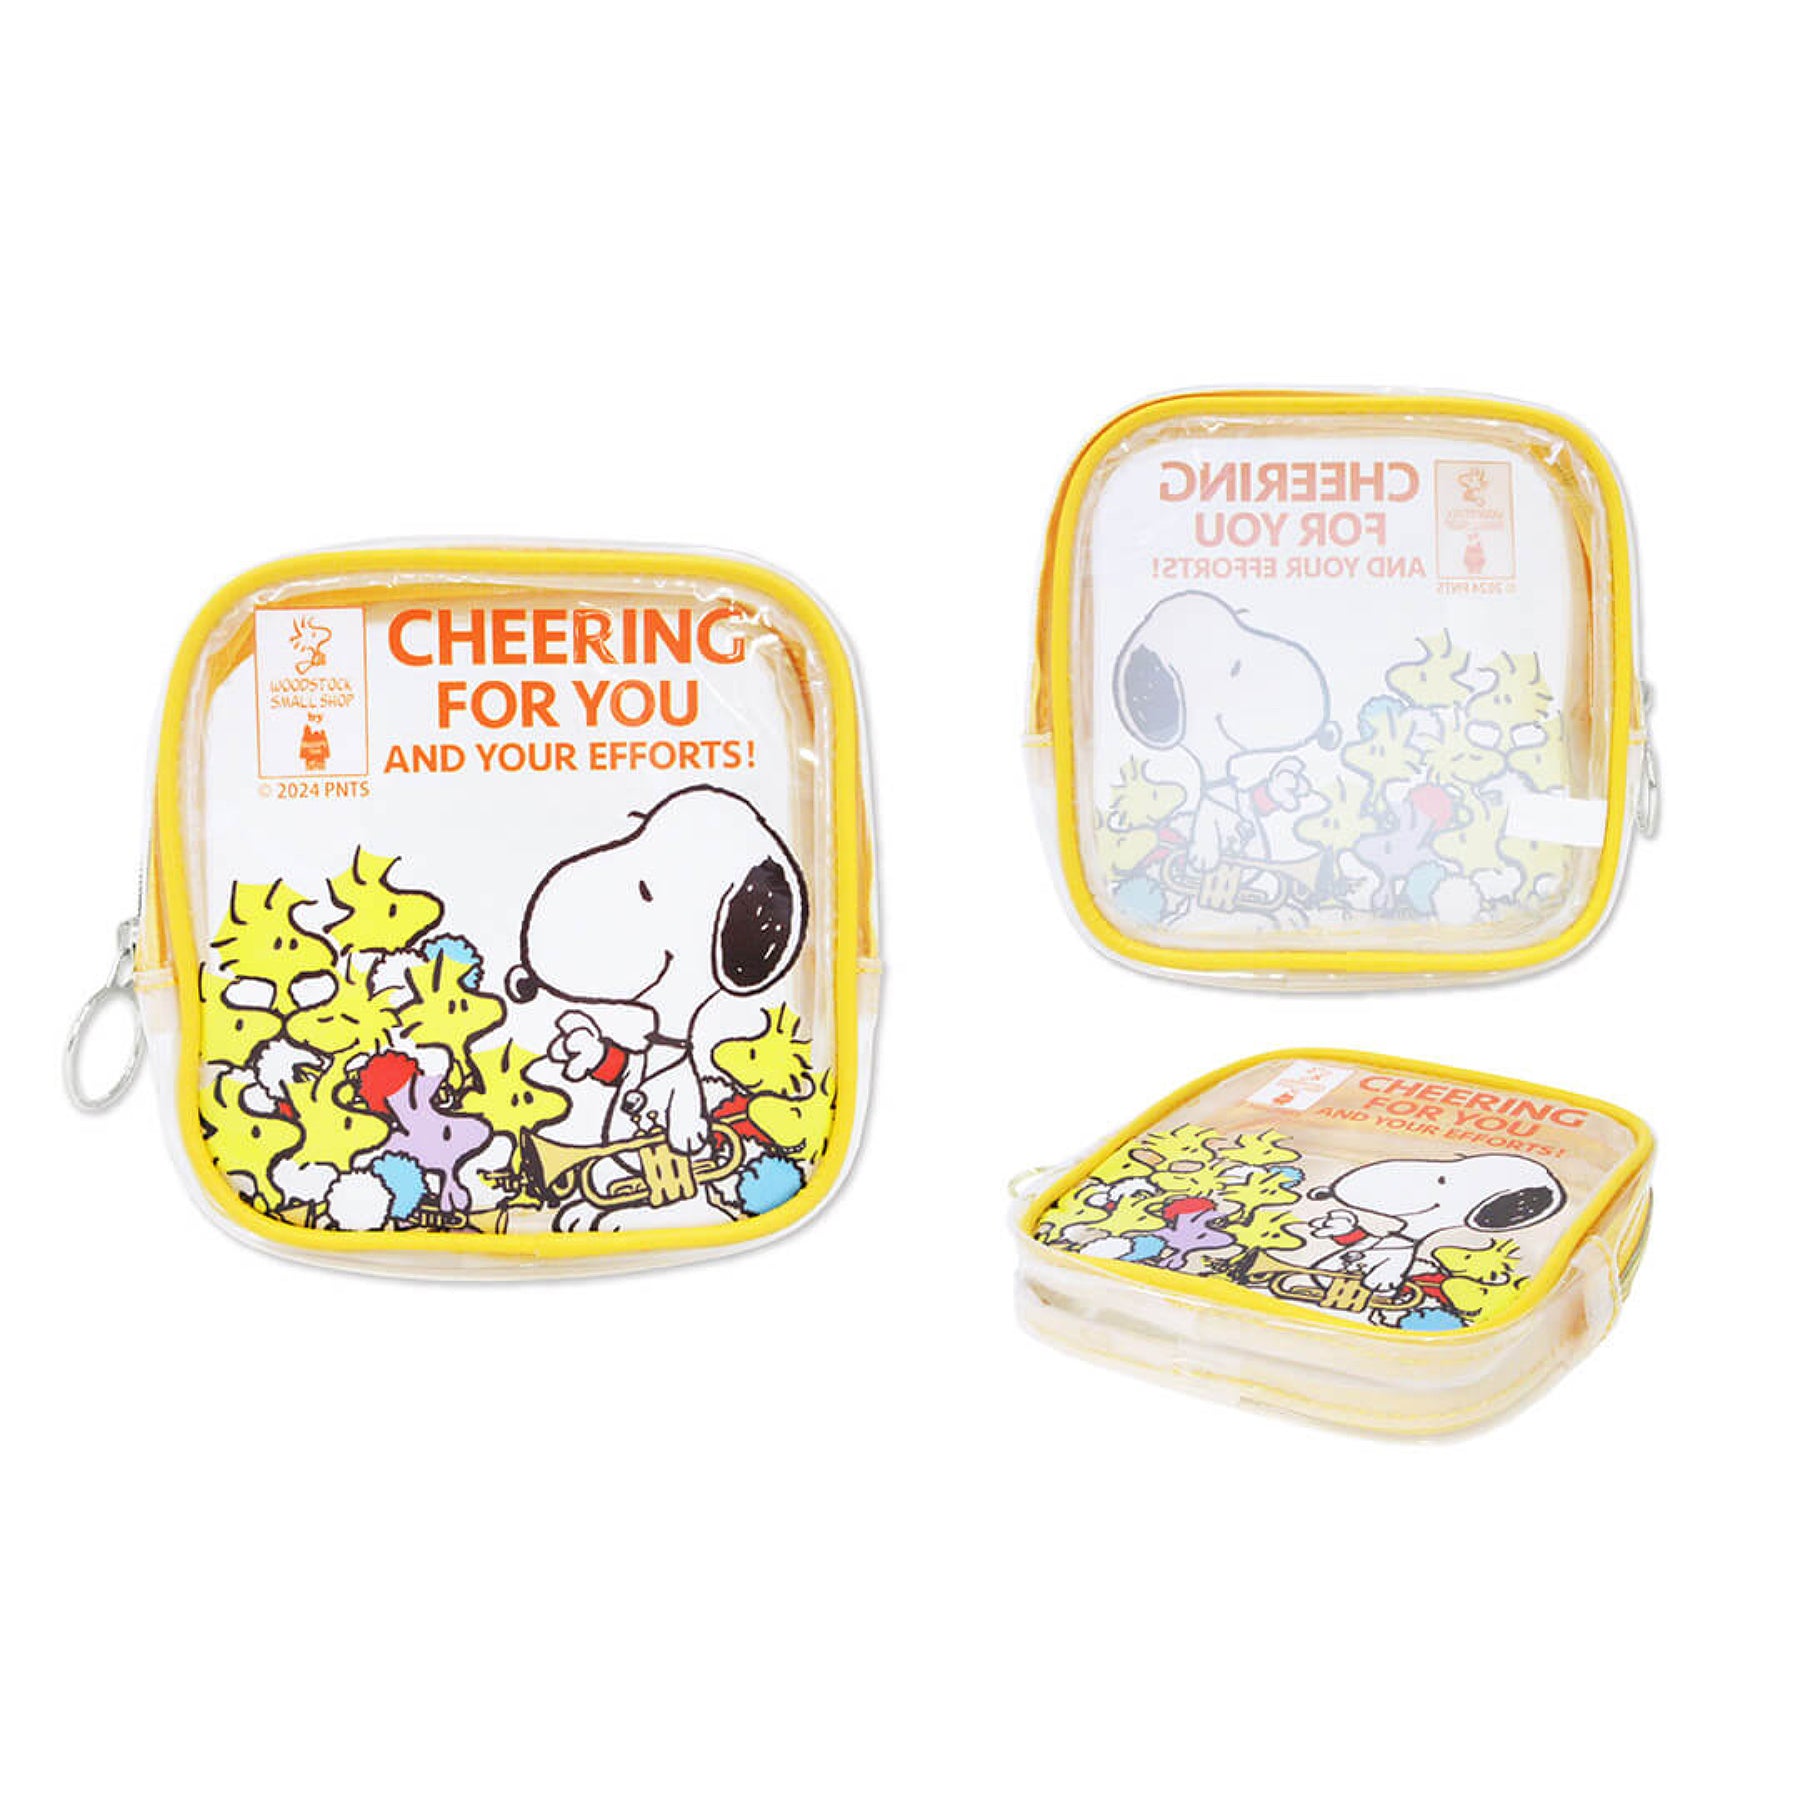 Woodstock Fair「CHEERING FOR YOU AND YOUR EFFORTS!」- 透明Pouch